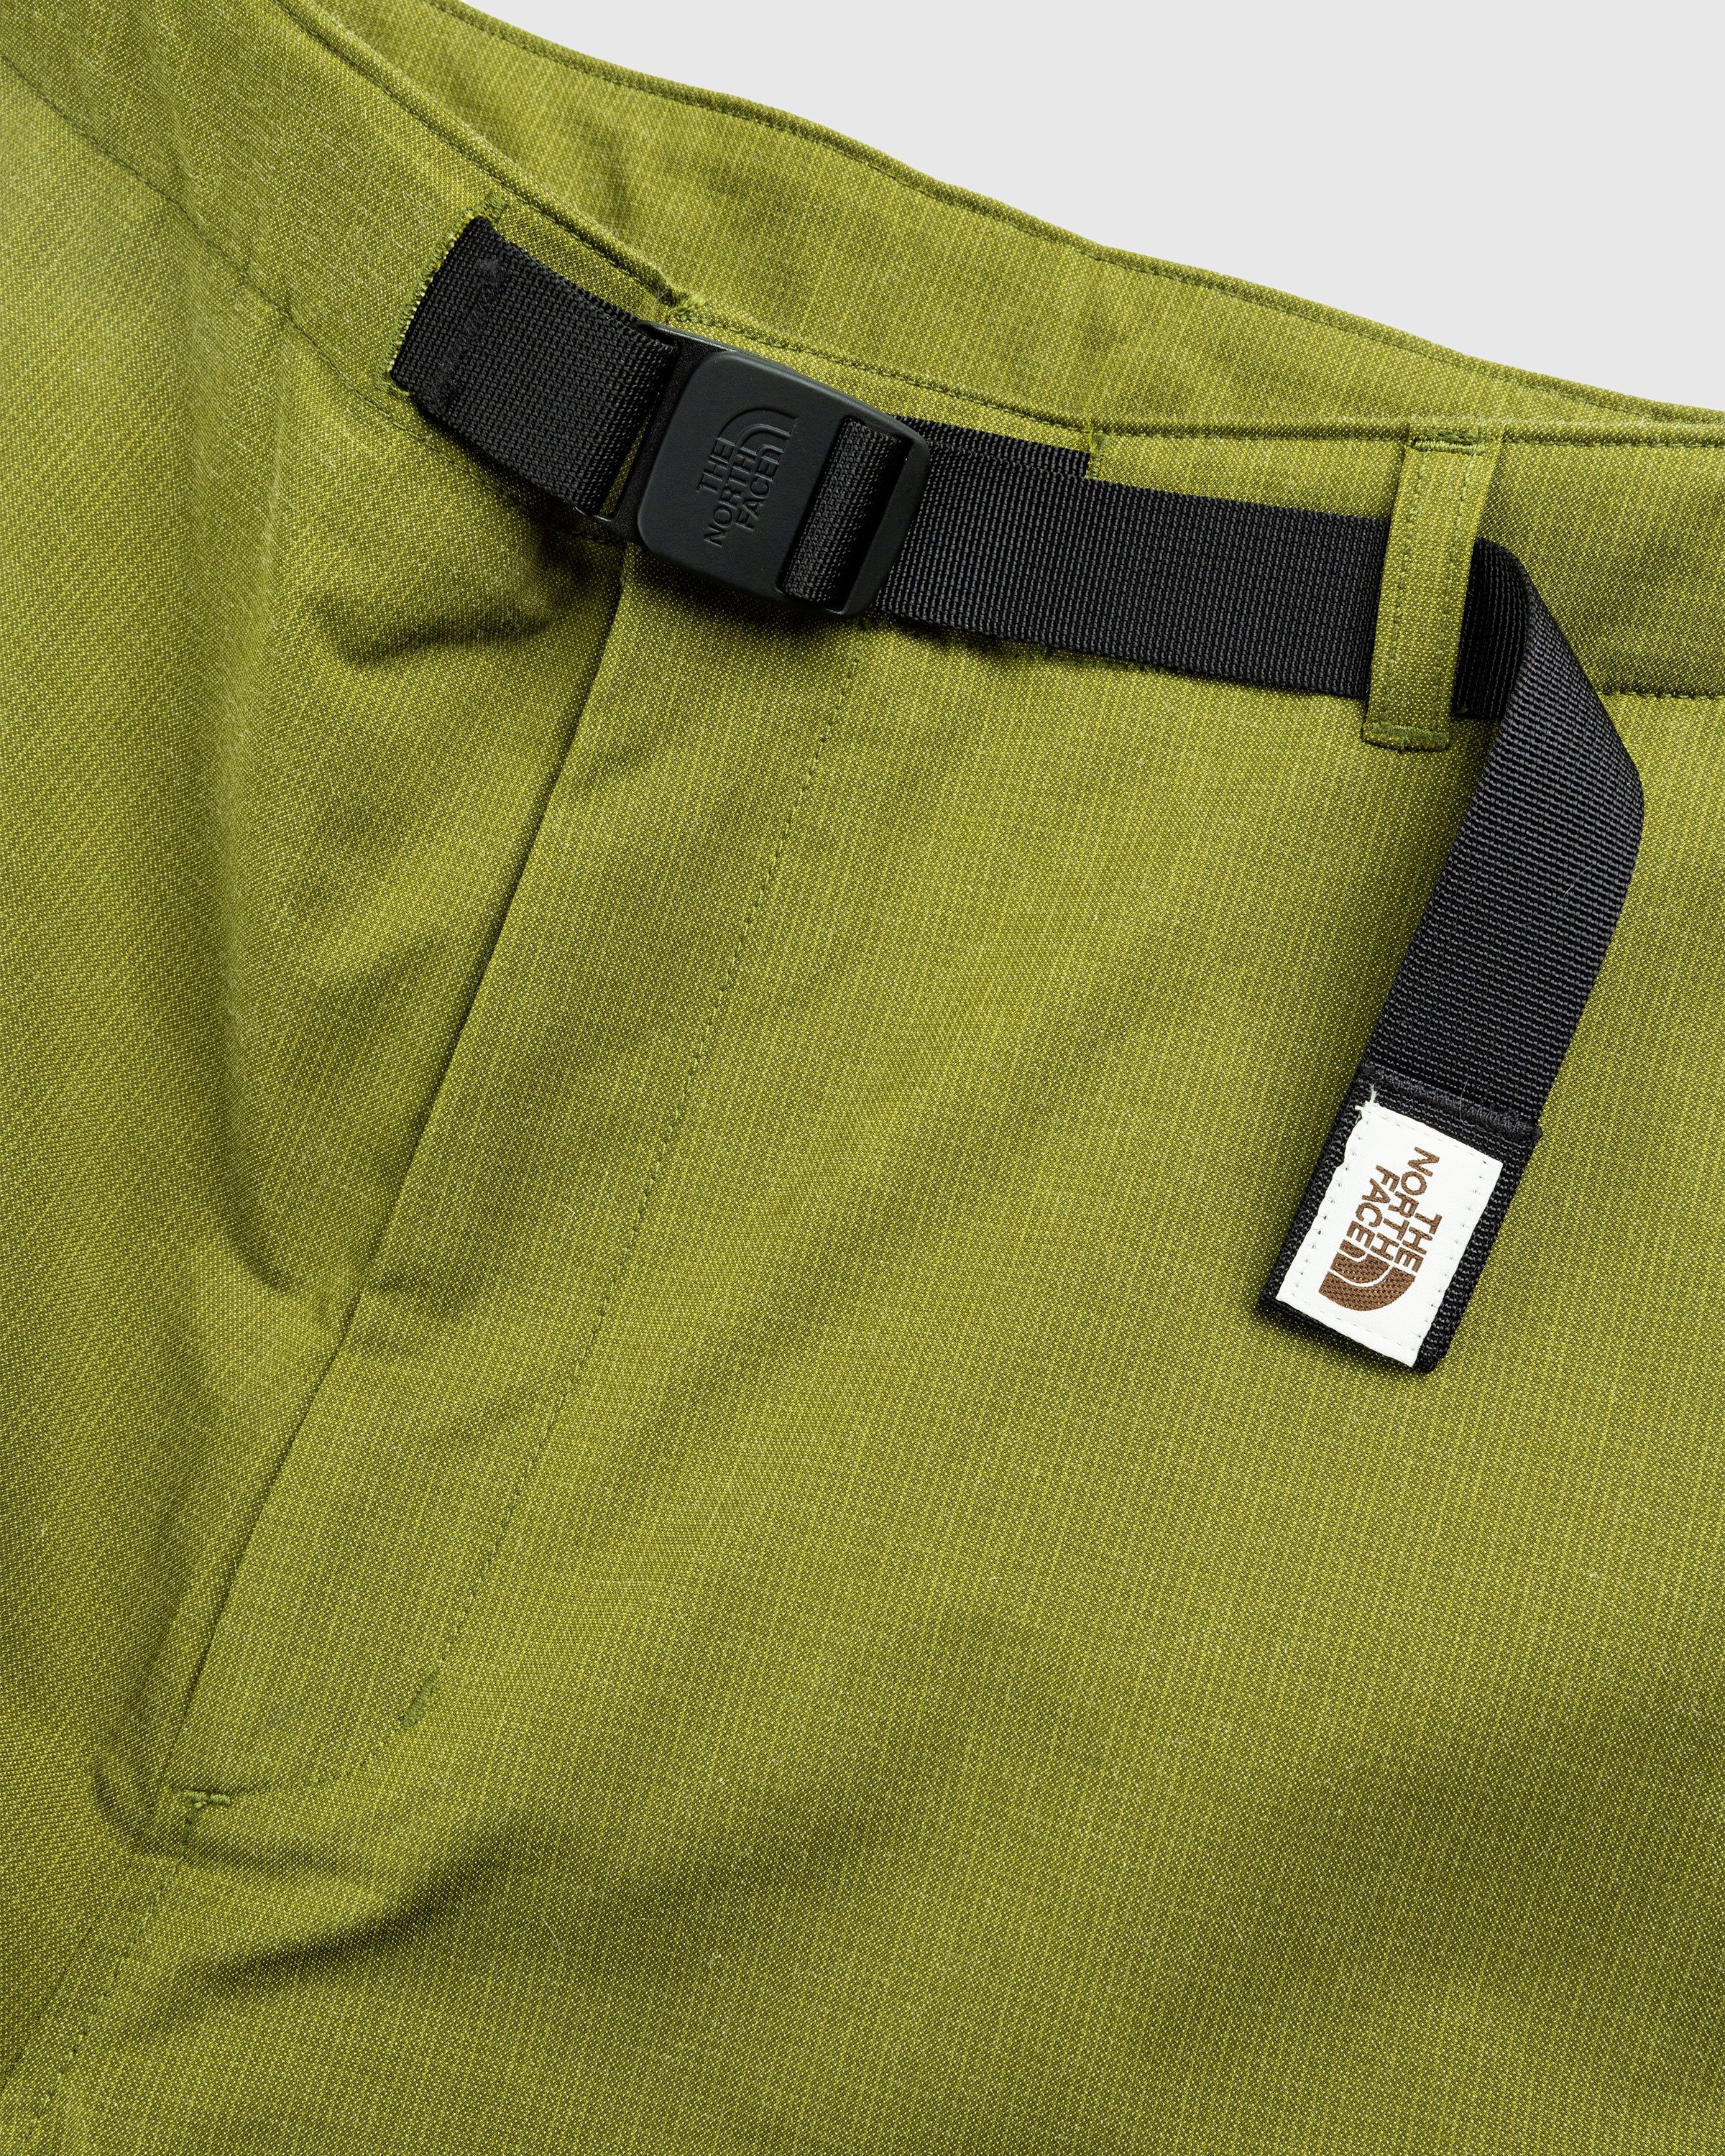 The North Face - M M66 TEK TWILL WIDE LEG PANT FOREST OLIVE - Clothing - Green - Image 6